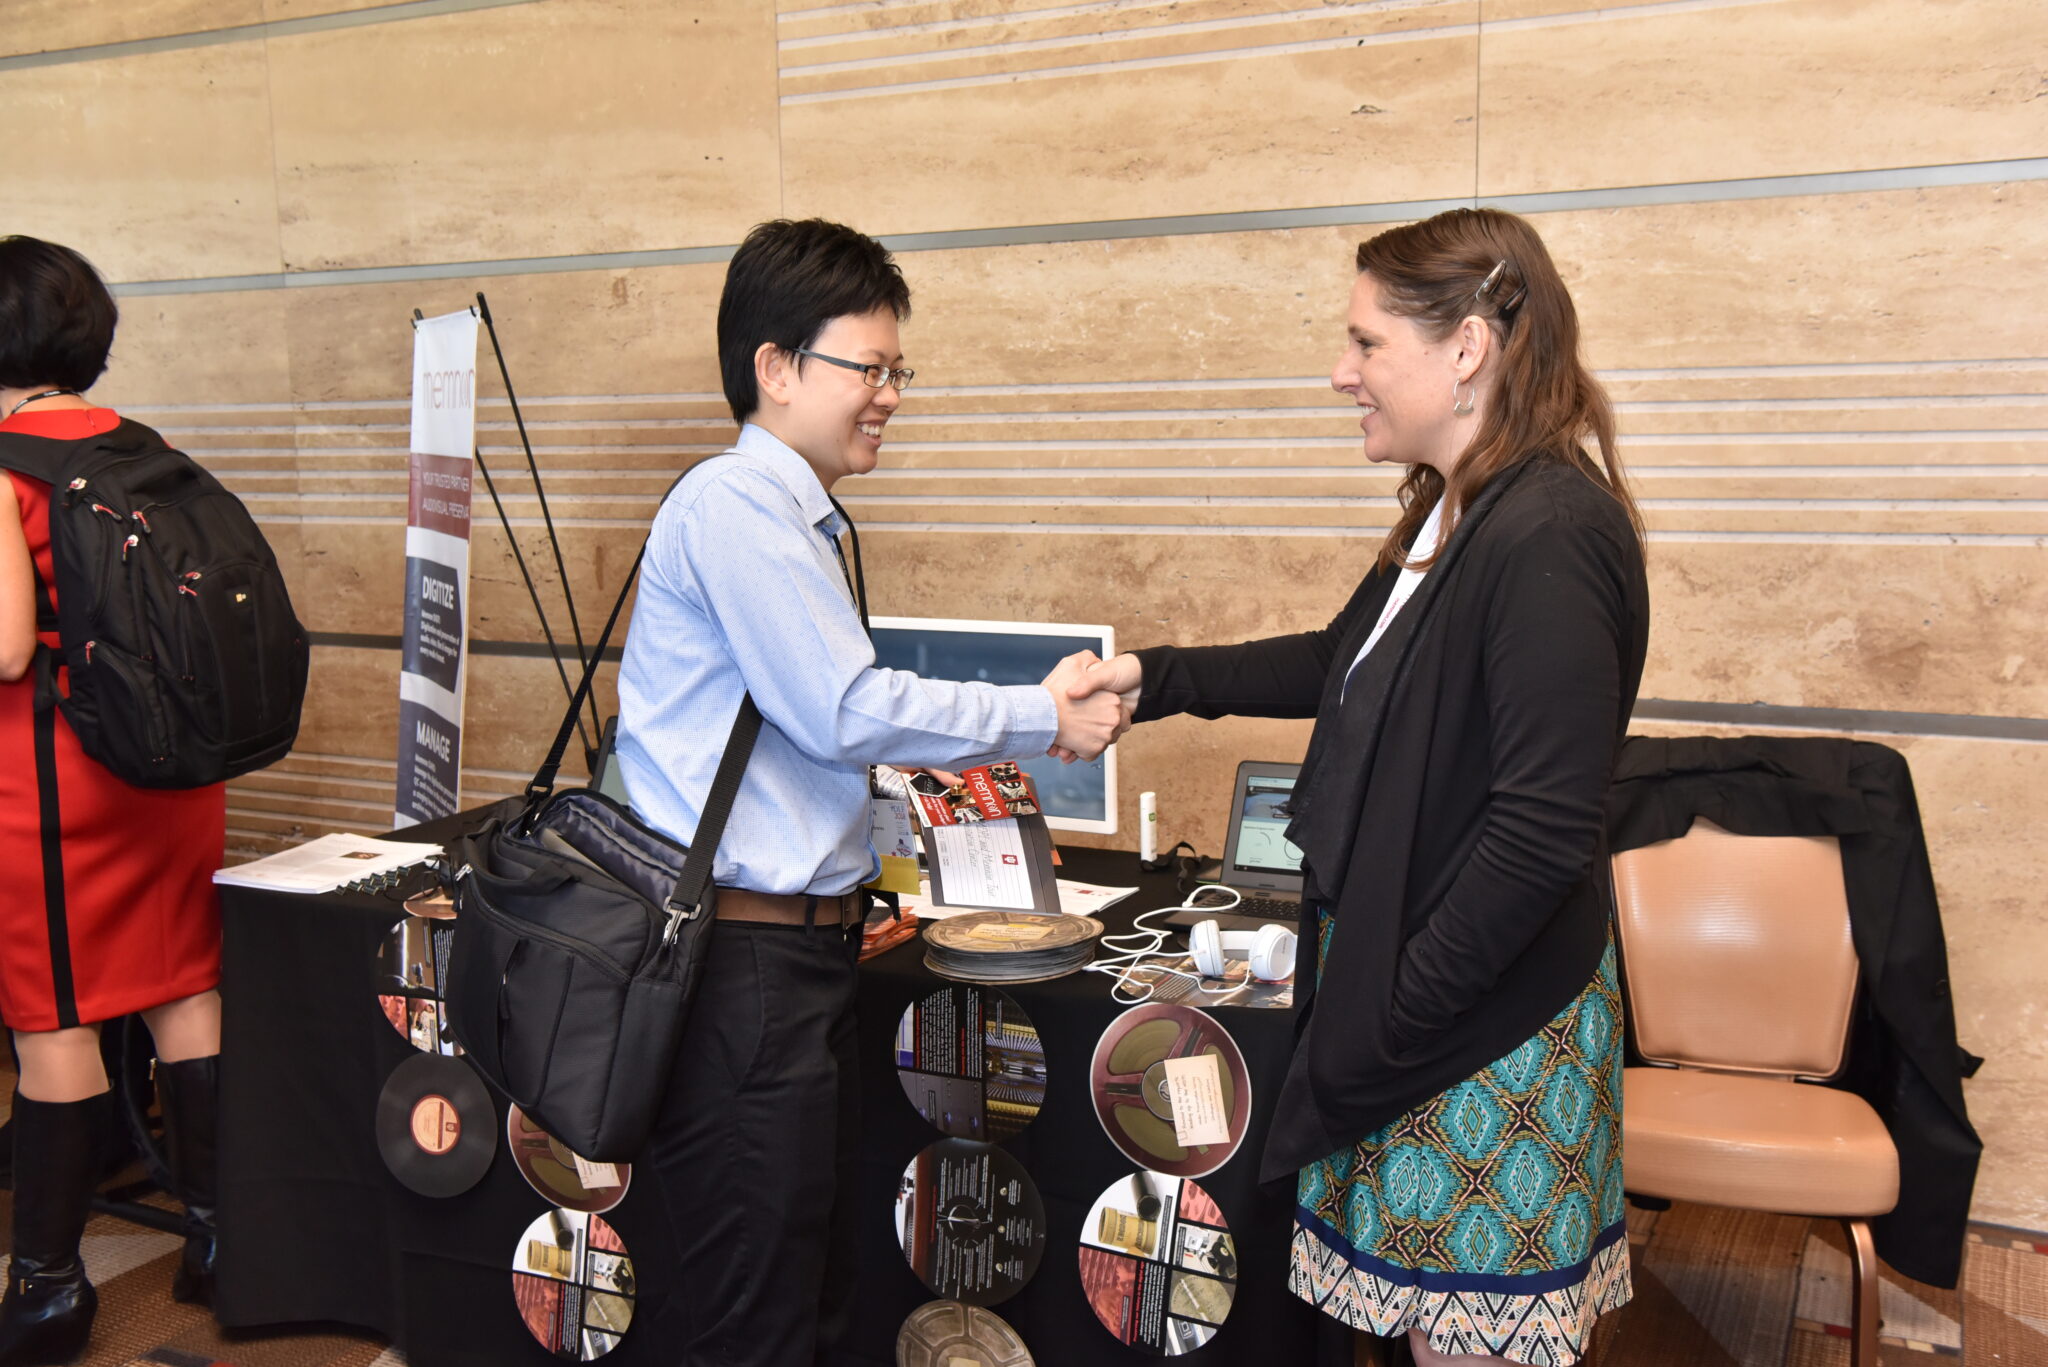 attendee and vendor shaking hands at 2018 Forum